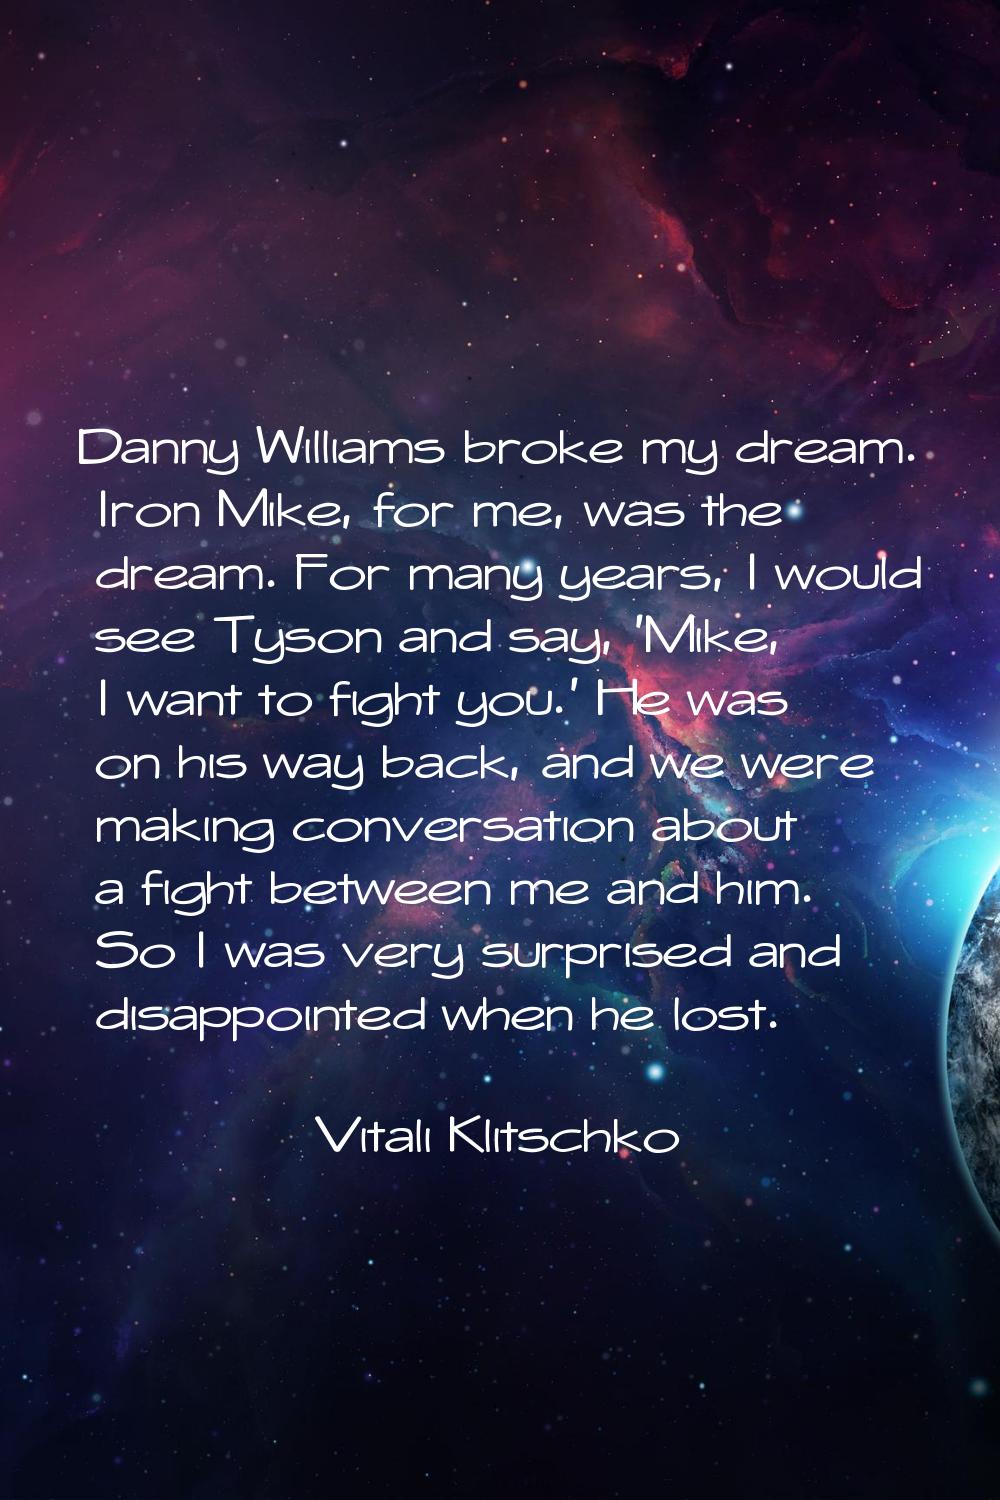 Danny Williams broke my dream. Iron Mike, for me, was the dream. For many years, I would see Tyson 